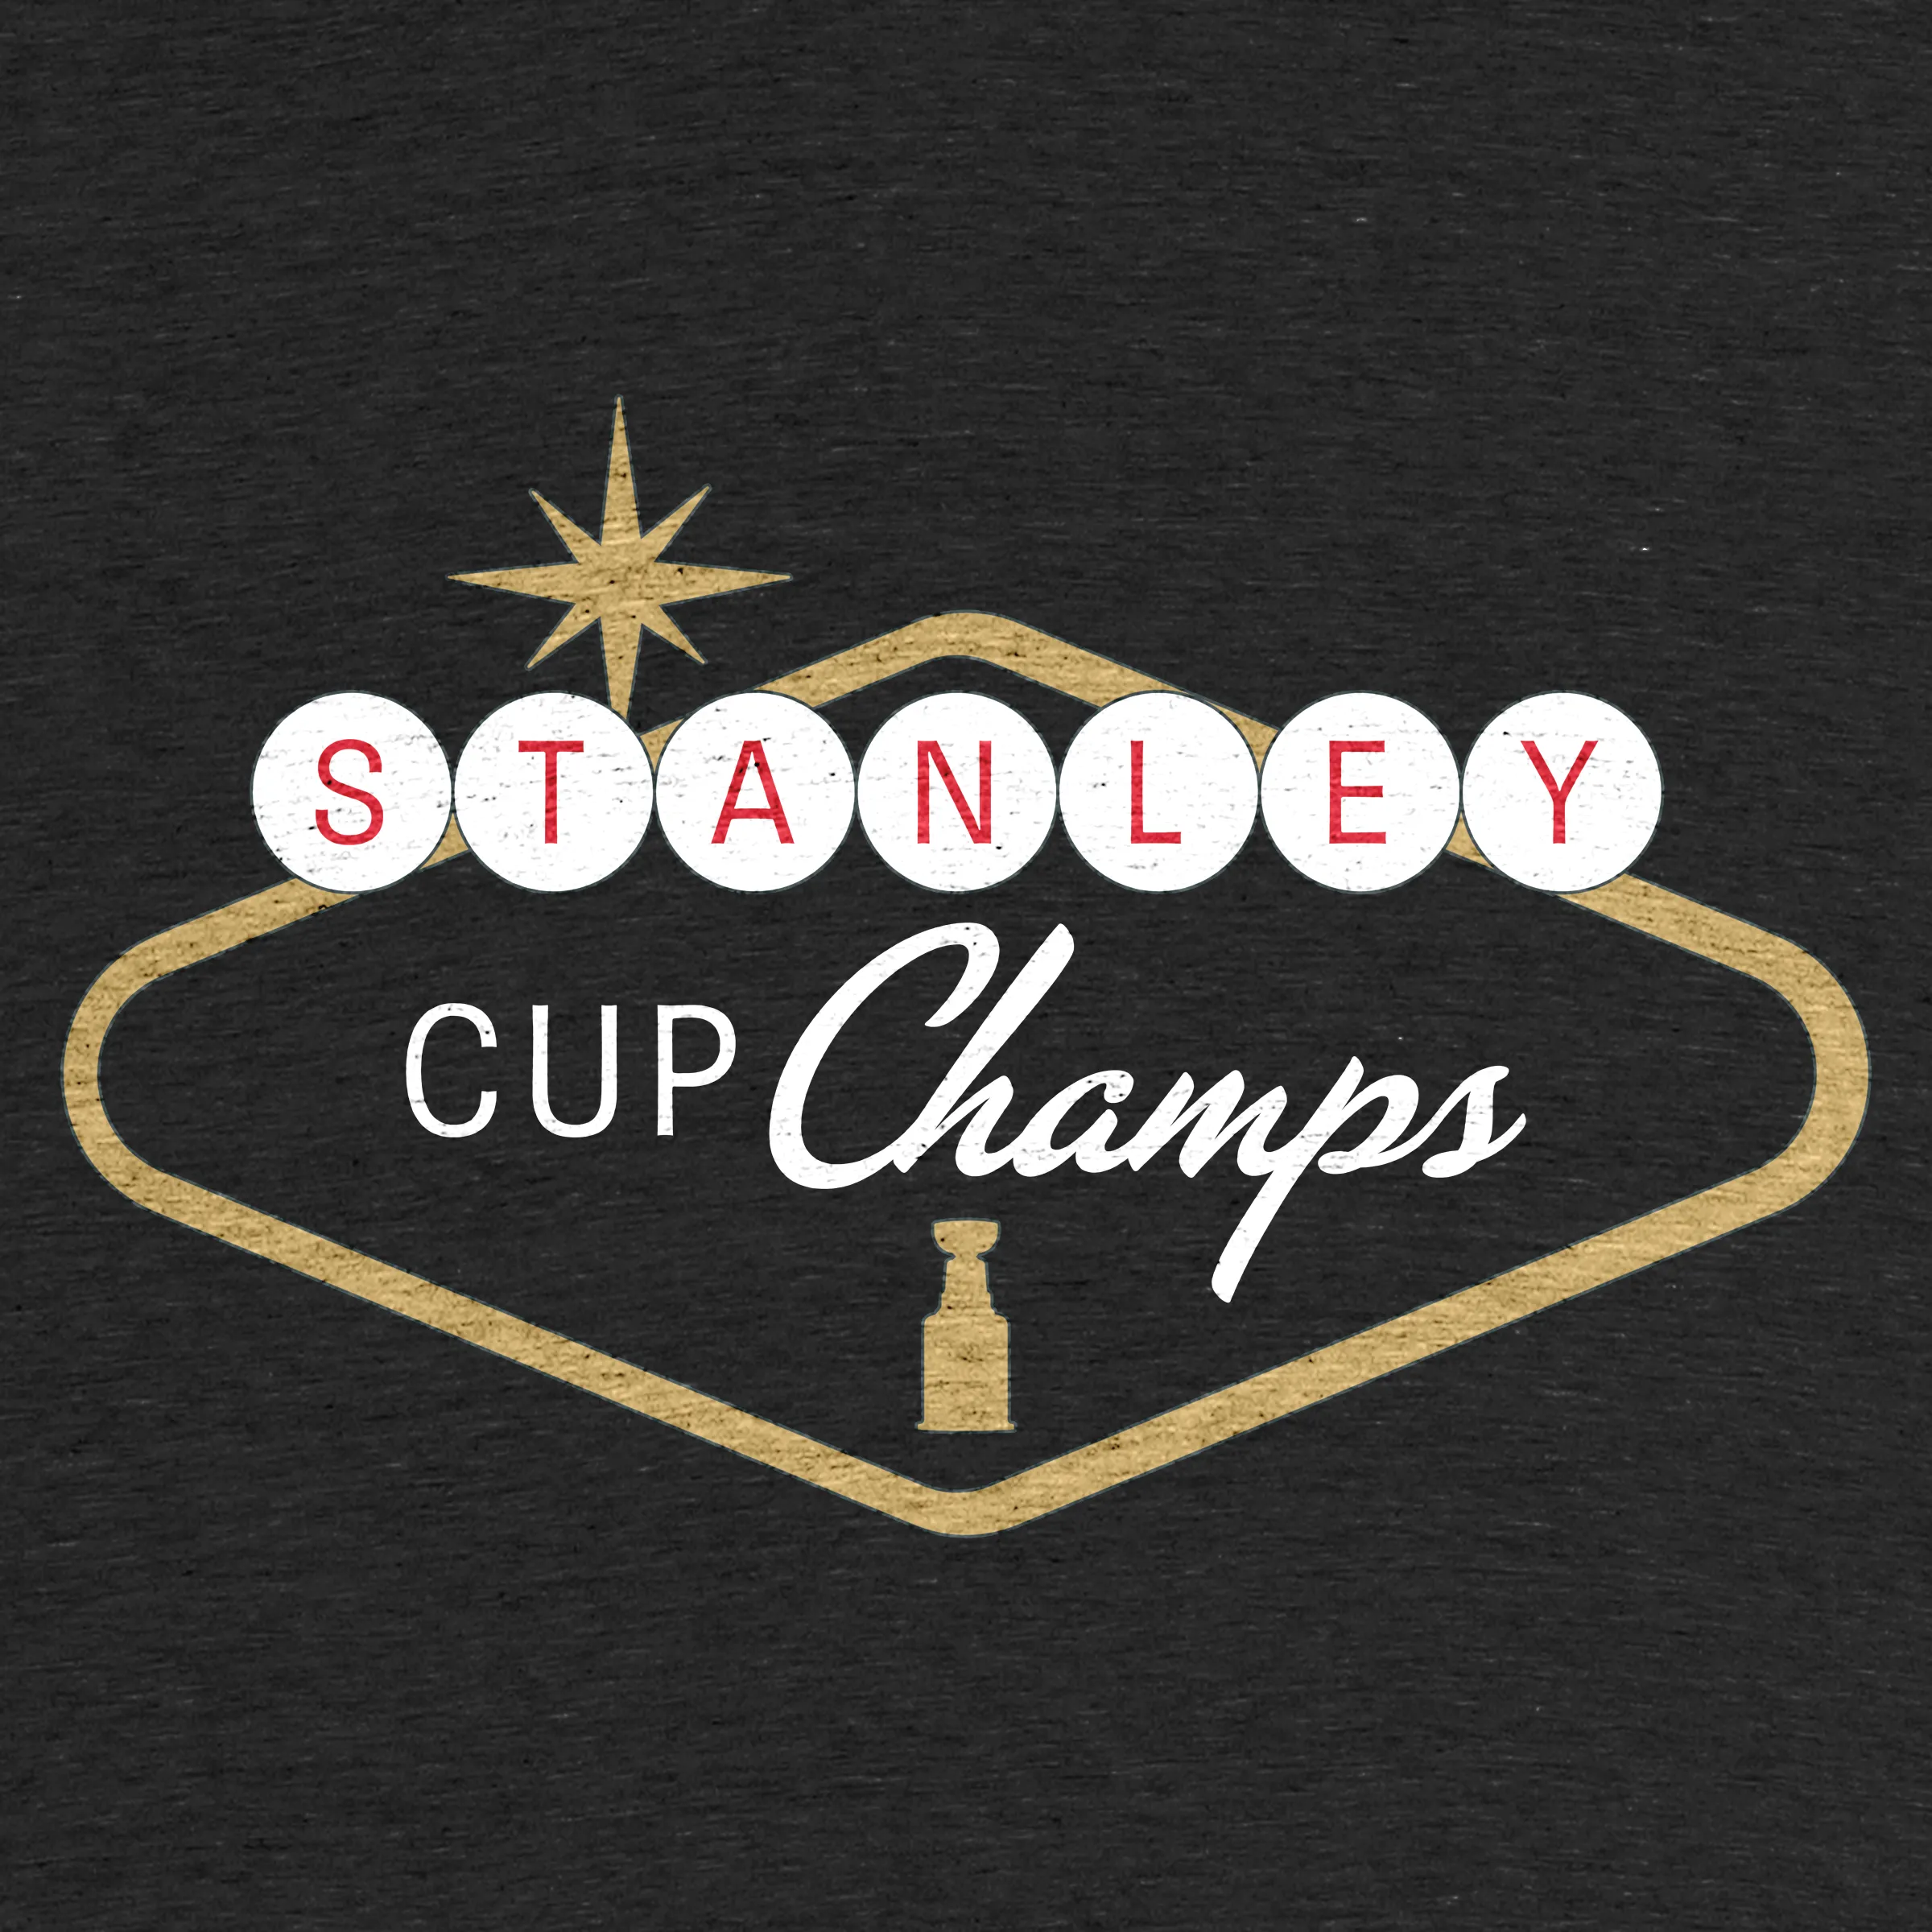 Vegas Stanley Cup Champs V2” graphic tee, pullover crewneck